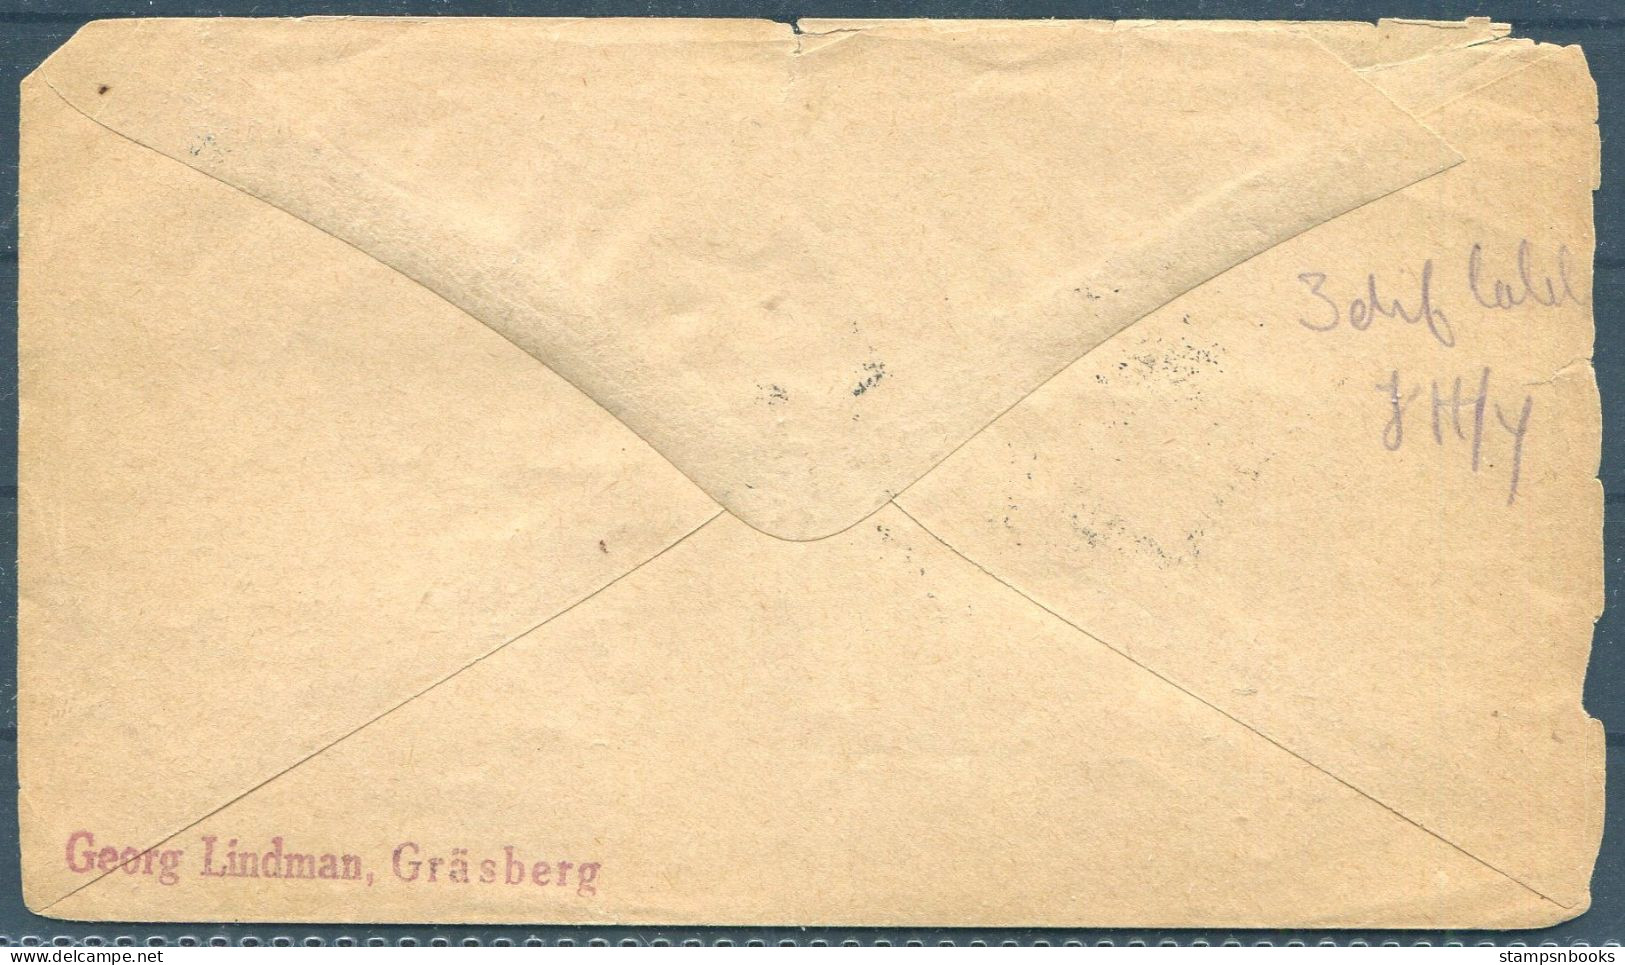 1928 Sweden Malmo - Wien Austria Airmail Luftpost Flight Cover - Covers & Documents